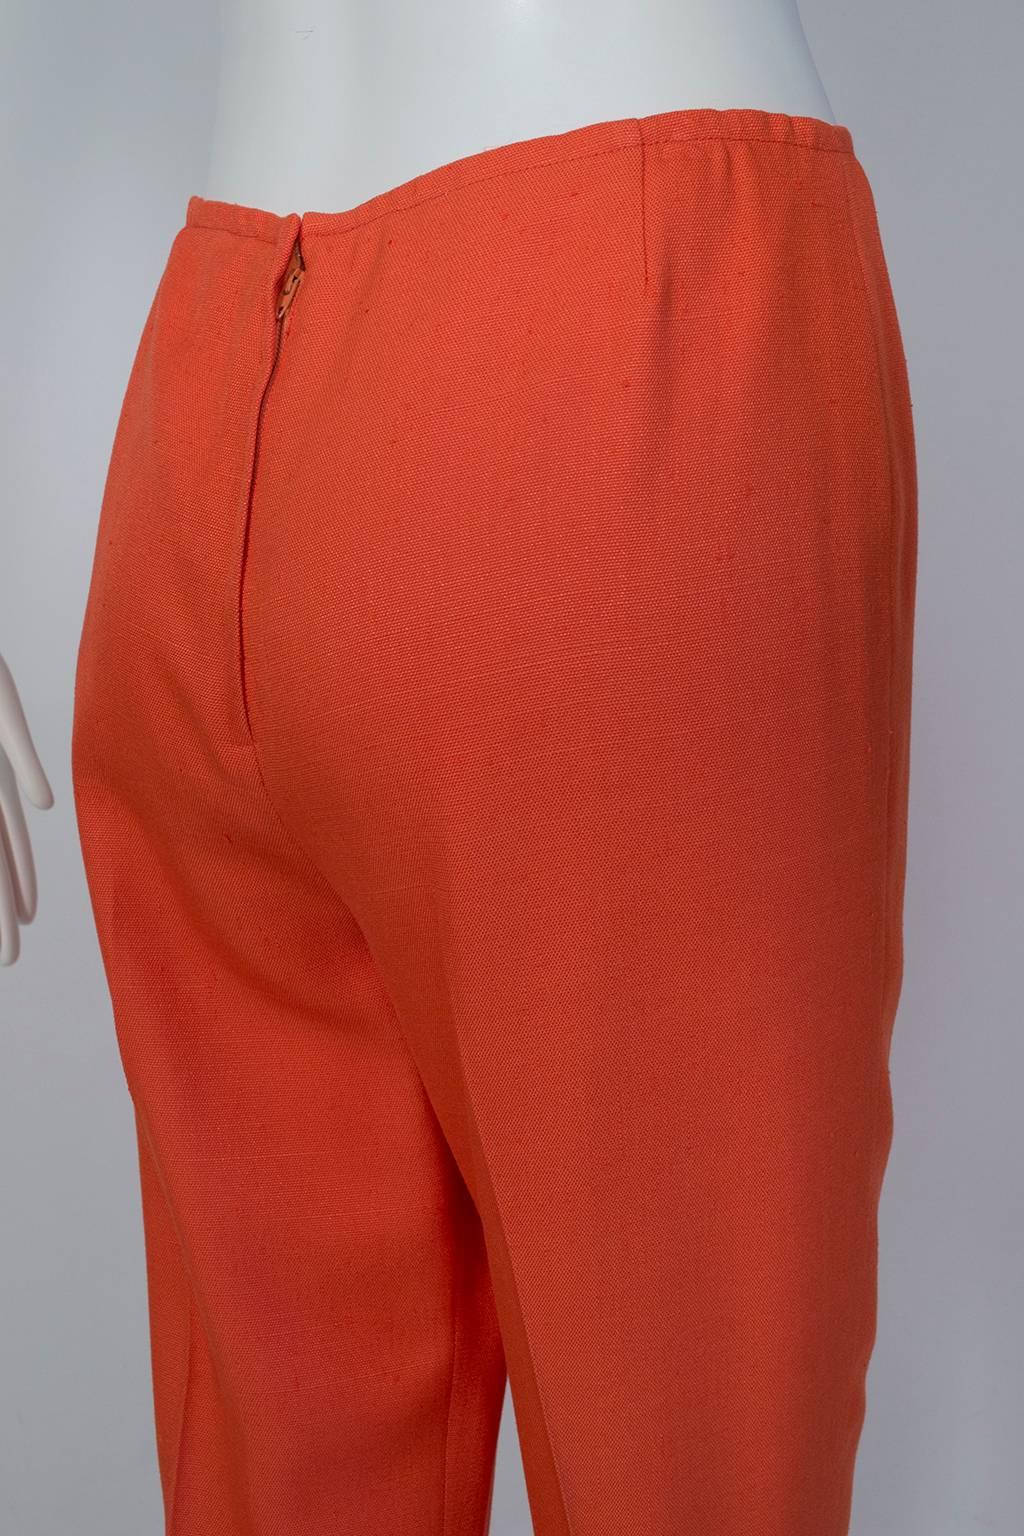 Documented Pierre Cardin Plunging Hostess Dress and Skinny Pants - XS-S, 1970 For Sale 9